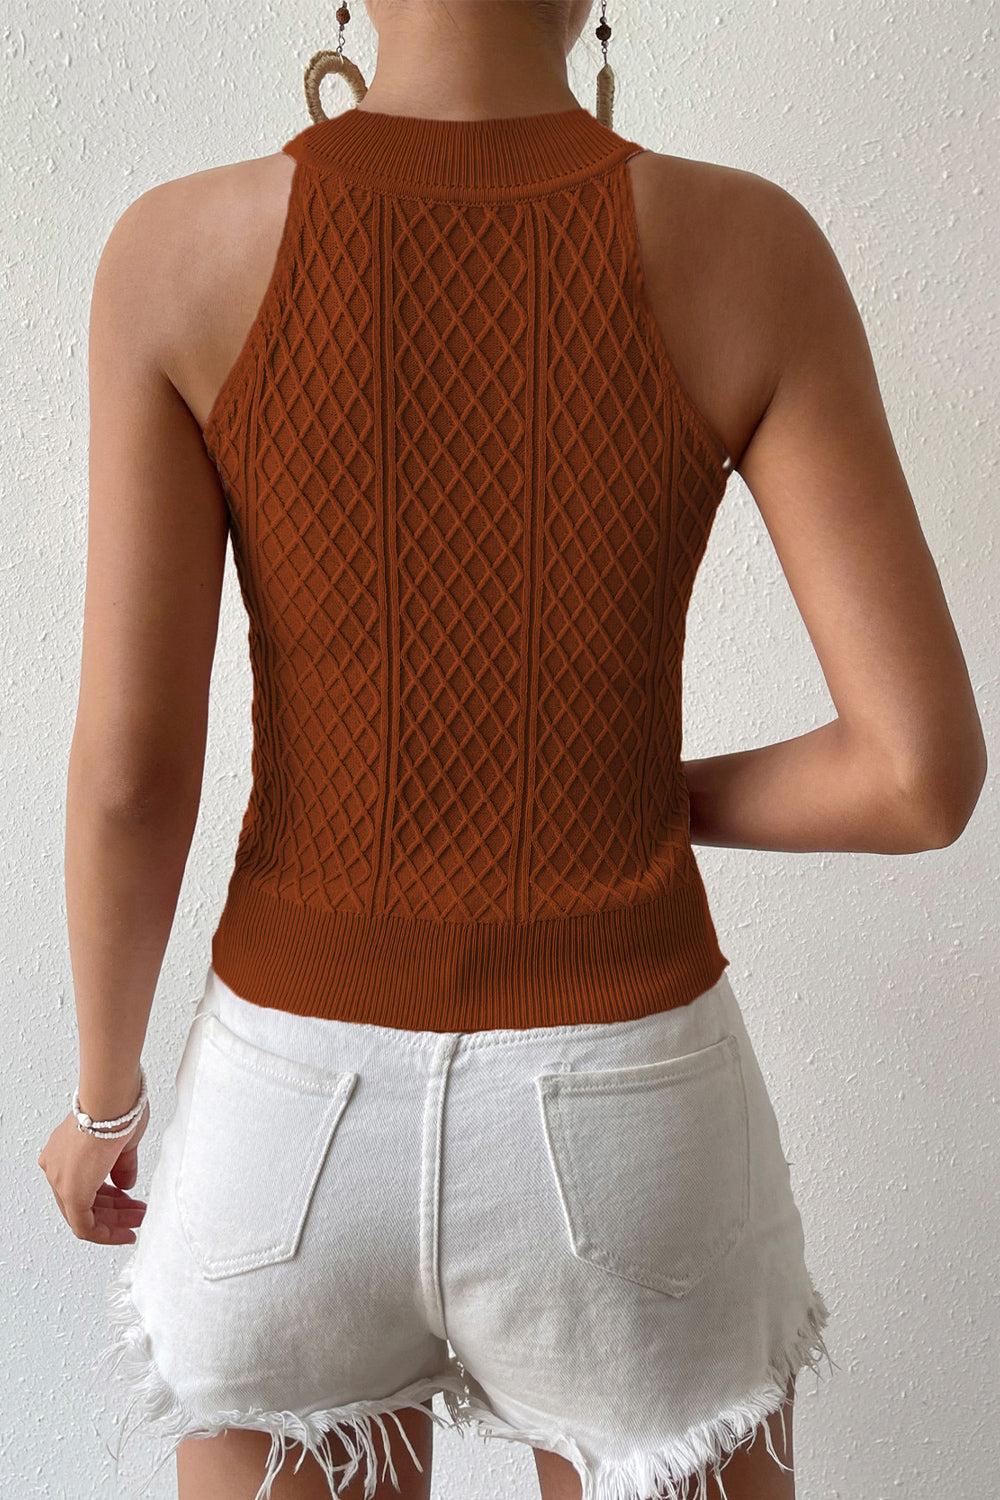 Round Neck Sleeveless Knit Top - Tops & Tees - Shirts & Tops - 18 - 2024